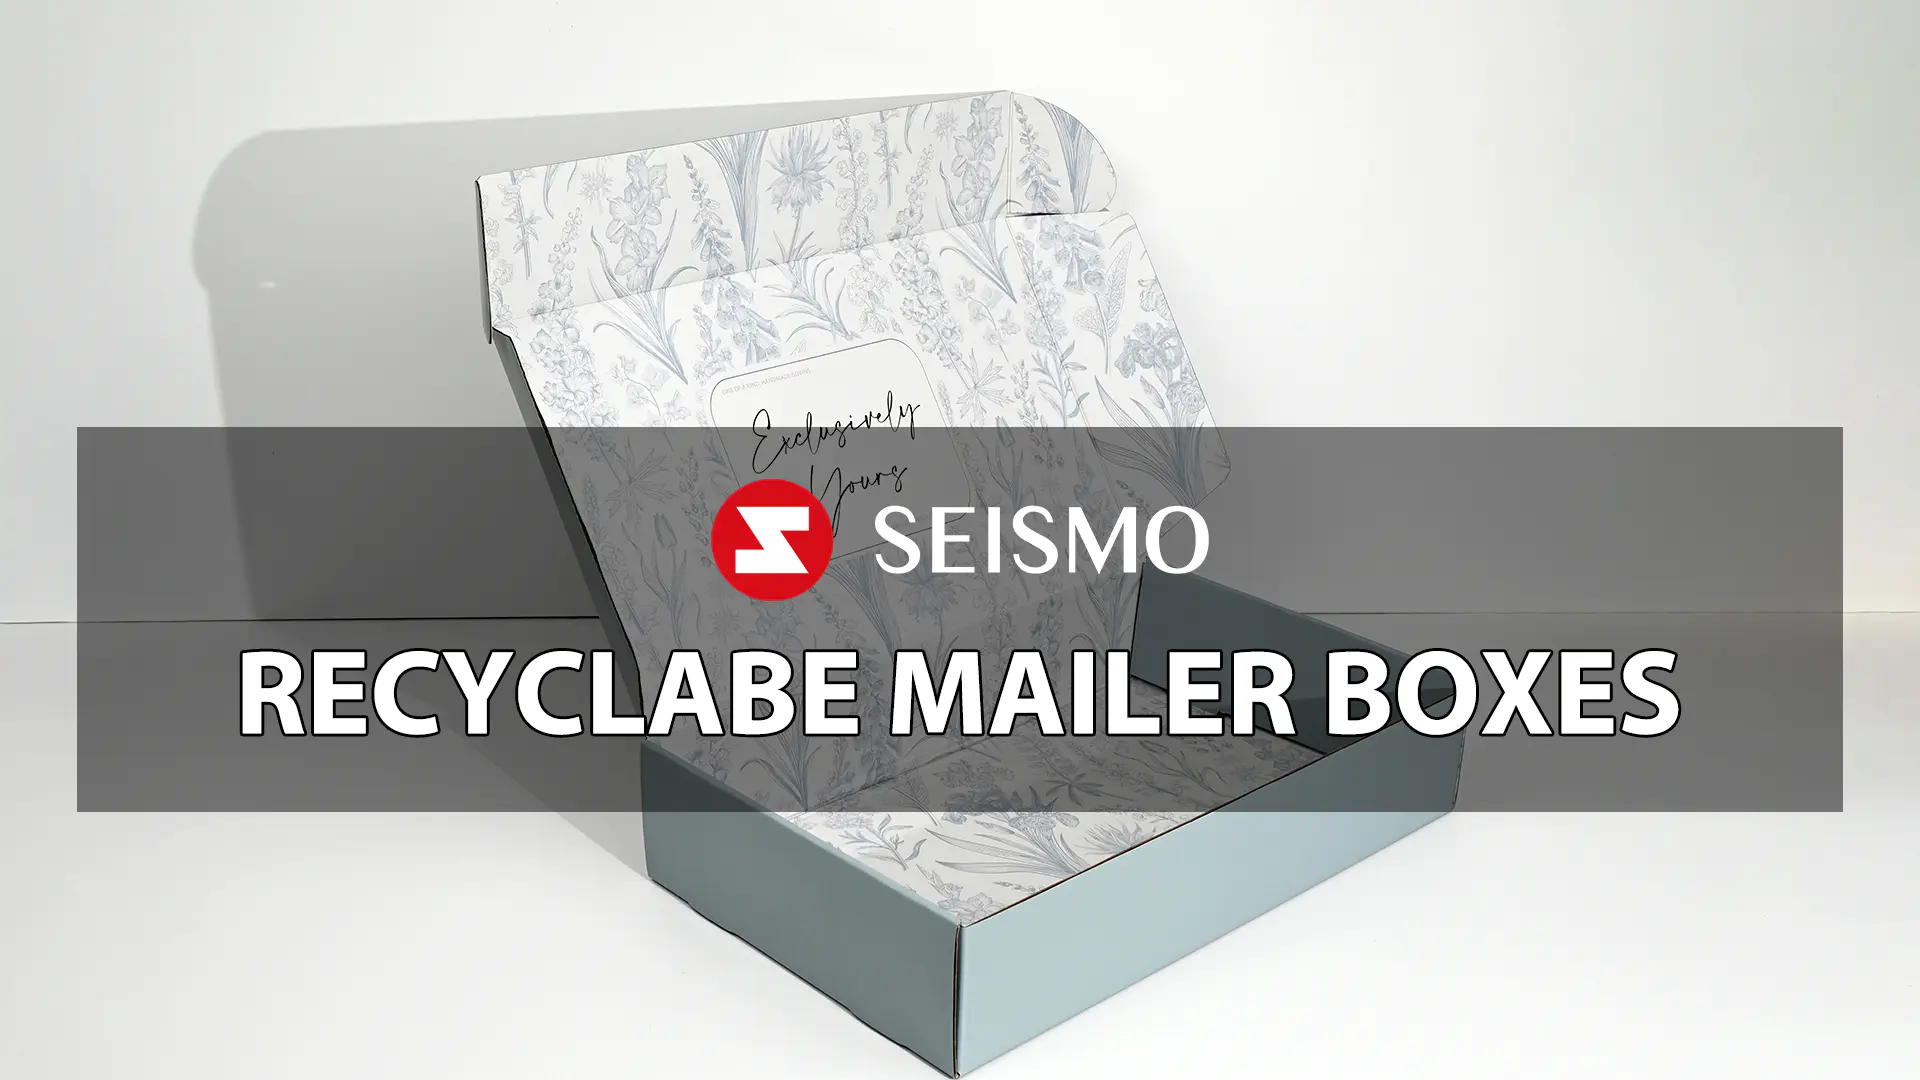 Recyclable Mailer Boxes: An Eco-Conscious Shipping Solution